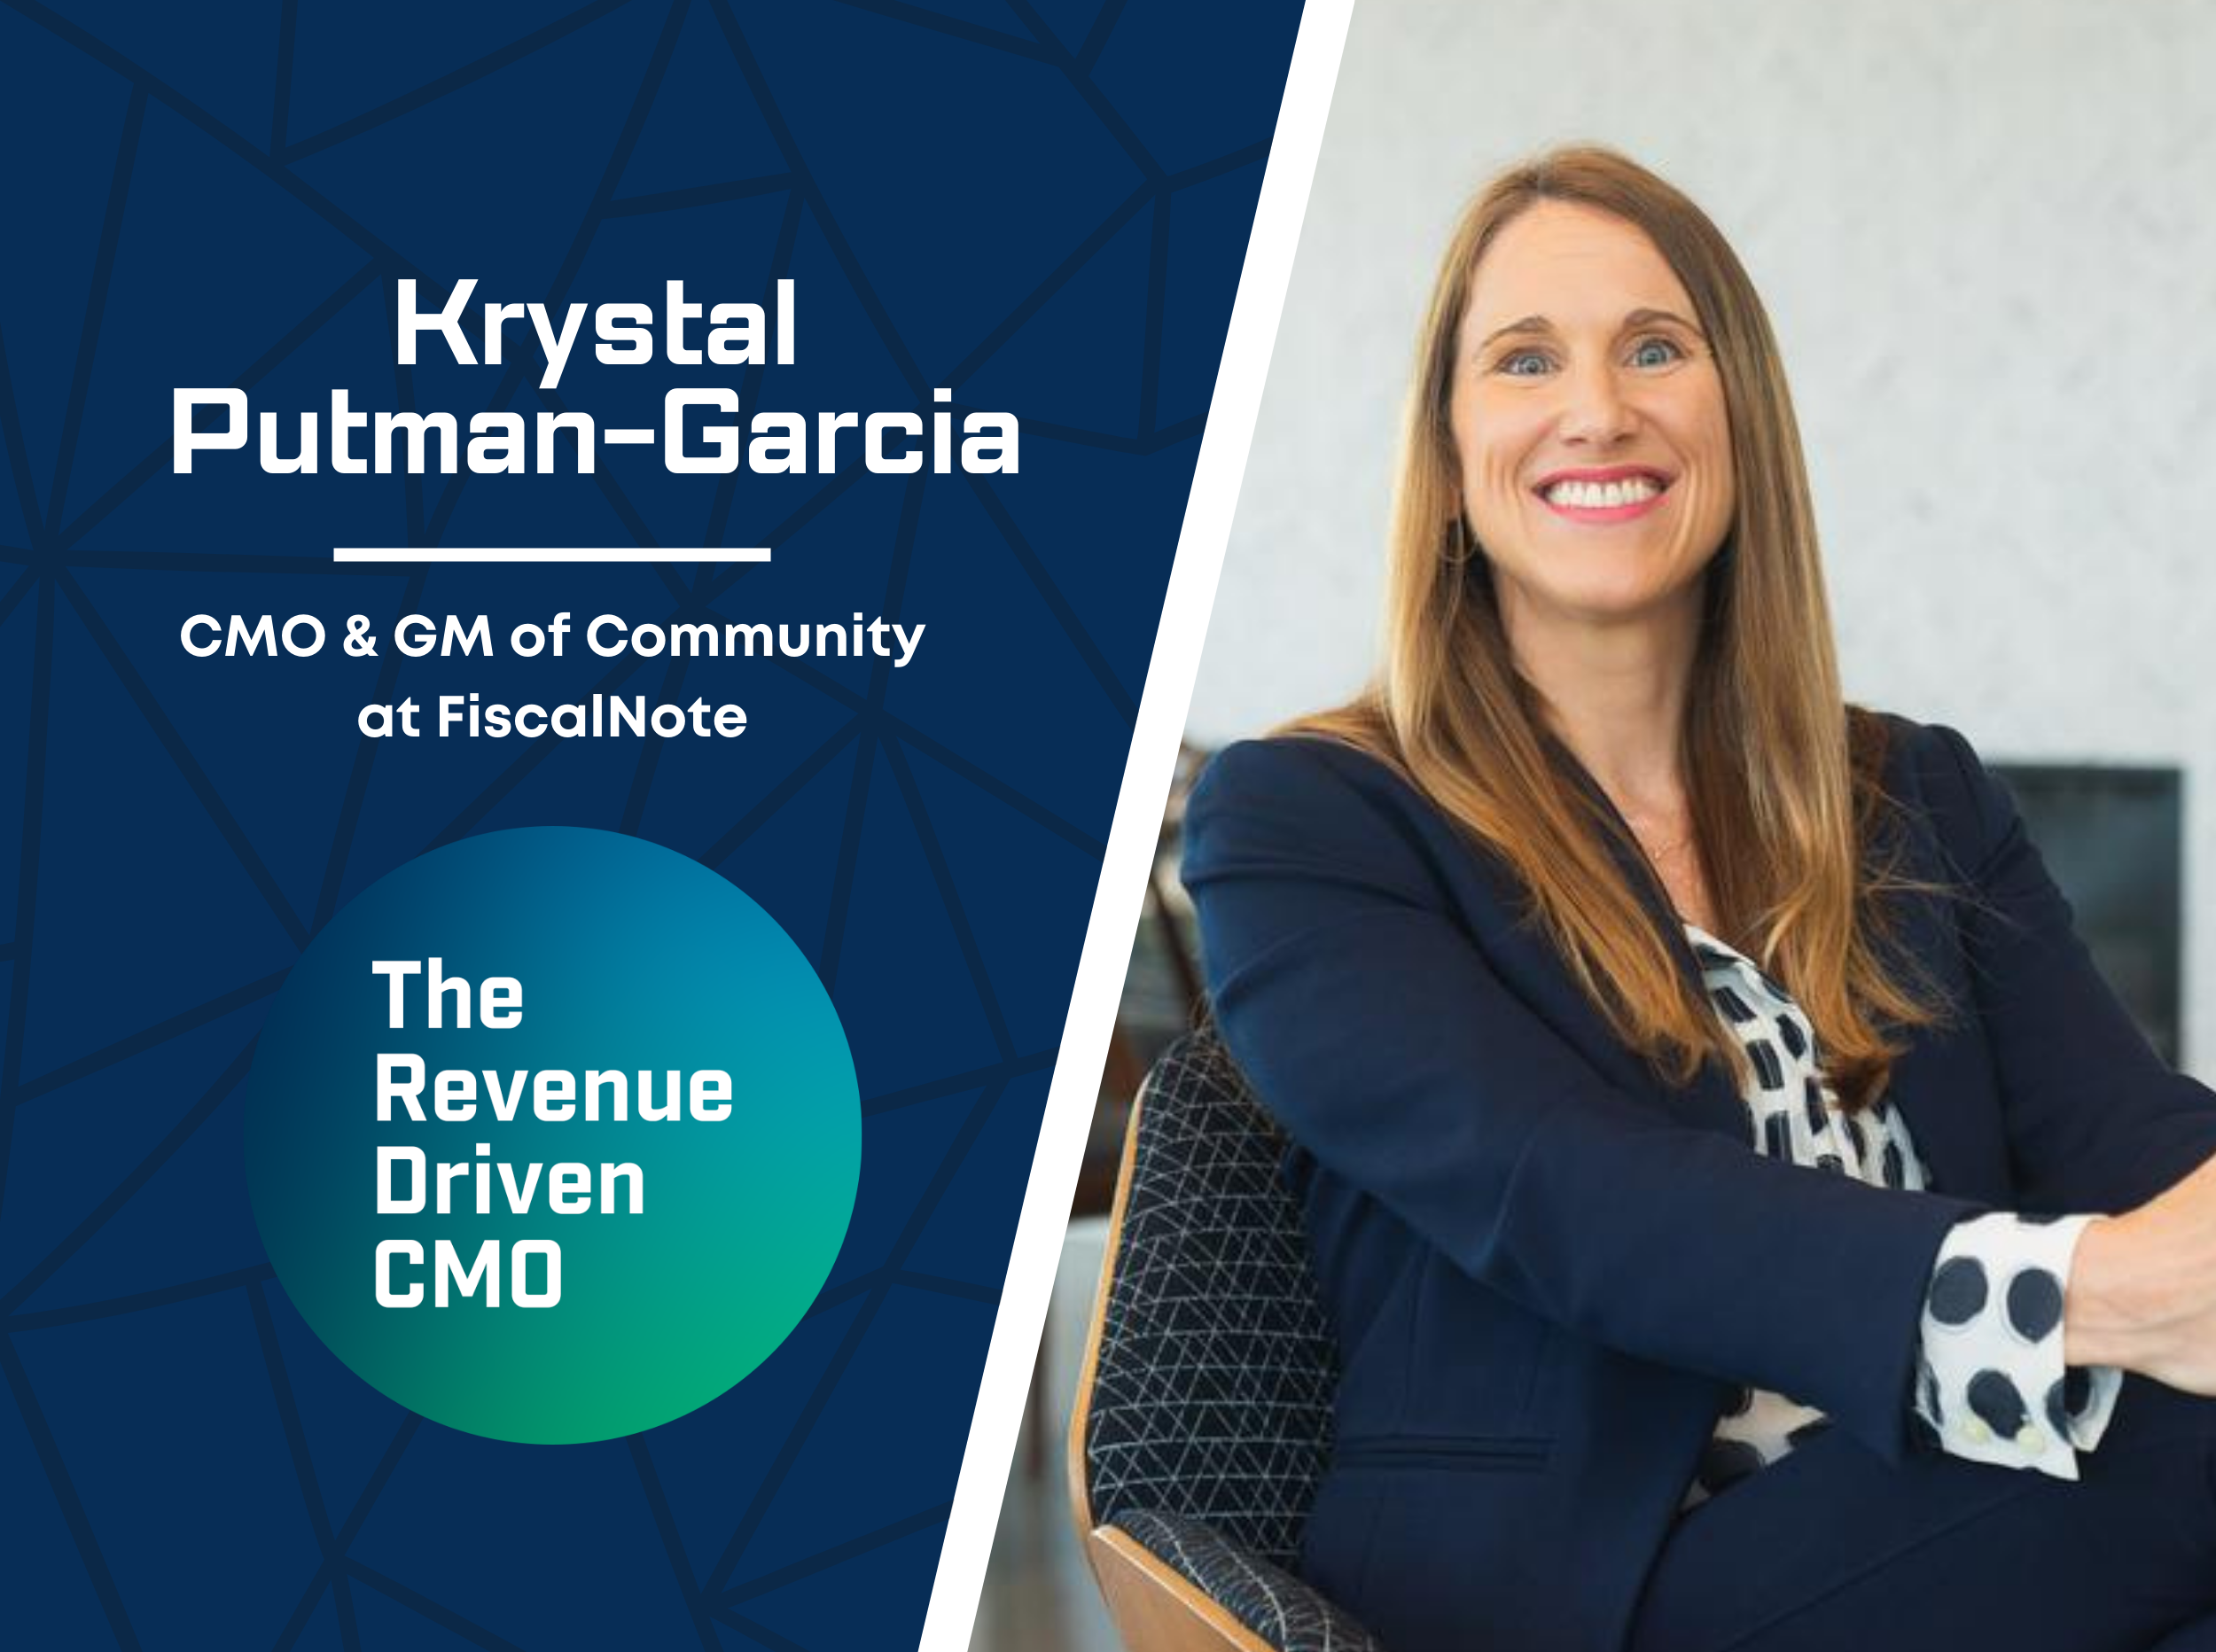 Be an advocate for your customers with Krystal Putman-Garcia